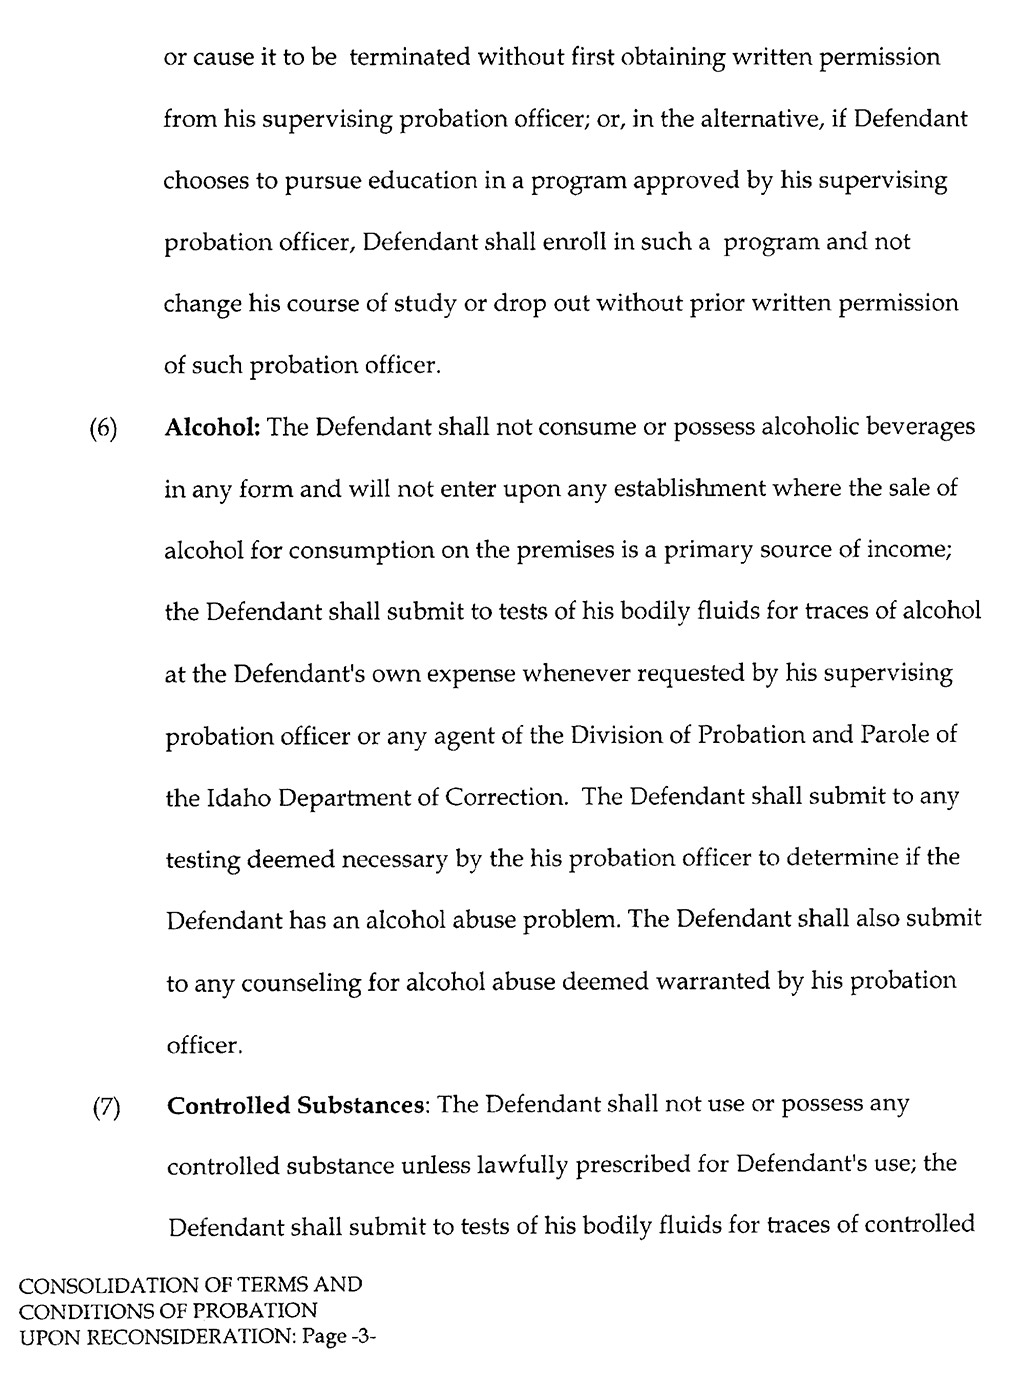 Consolidation of Terms & Conditions of Probation upon Reconsideration page 3